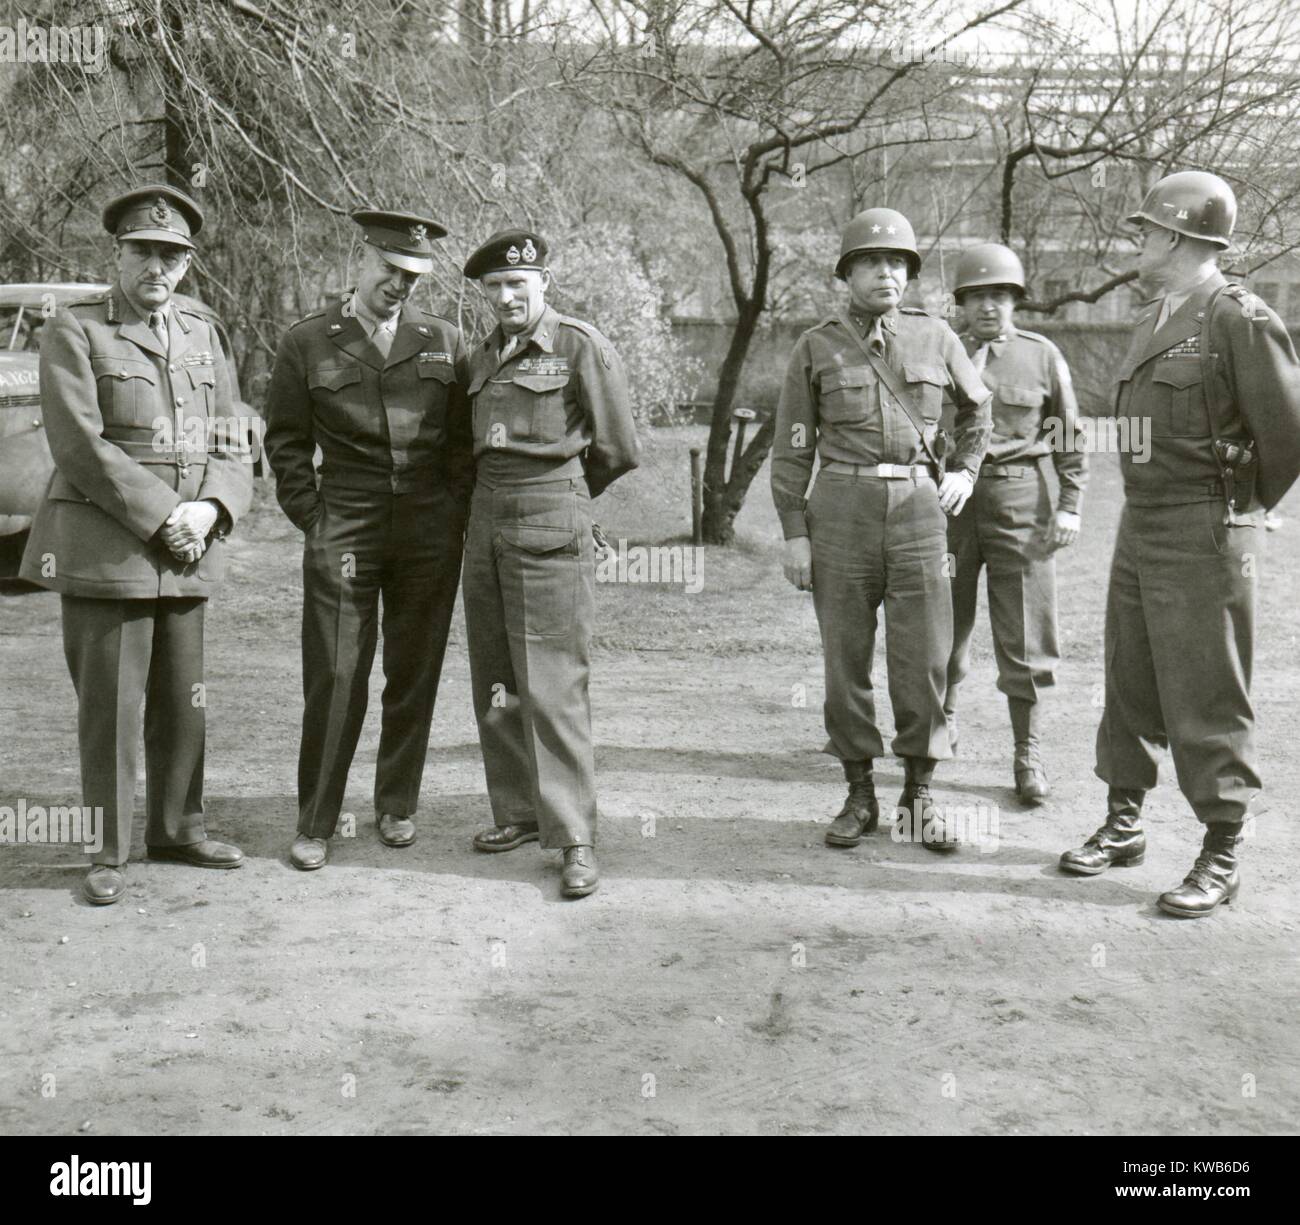 British and American World War 2 Commanders during a visit by Winston Churchill. At XVI Corps Headquarters, Germany, March 25, 1945. L to R: Sir Alan Brooke, Dwight Eisenhower, Sir Bernard Montgomery, John B. Anderson, unidentified, and Omar Bradley. (BSLOC 2014 8 112) Stock Photo